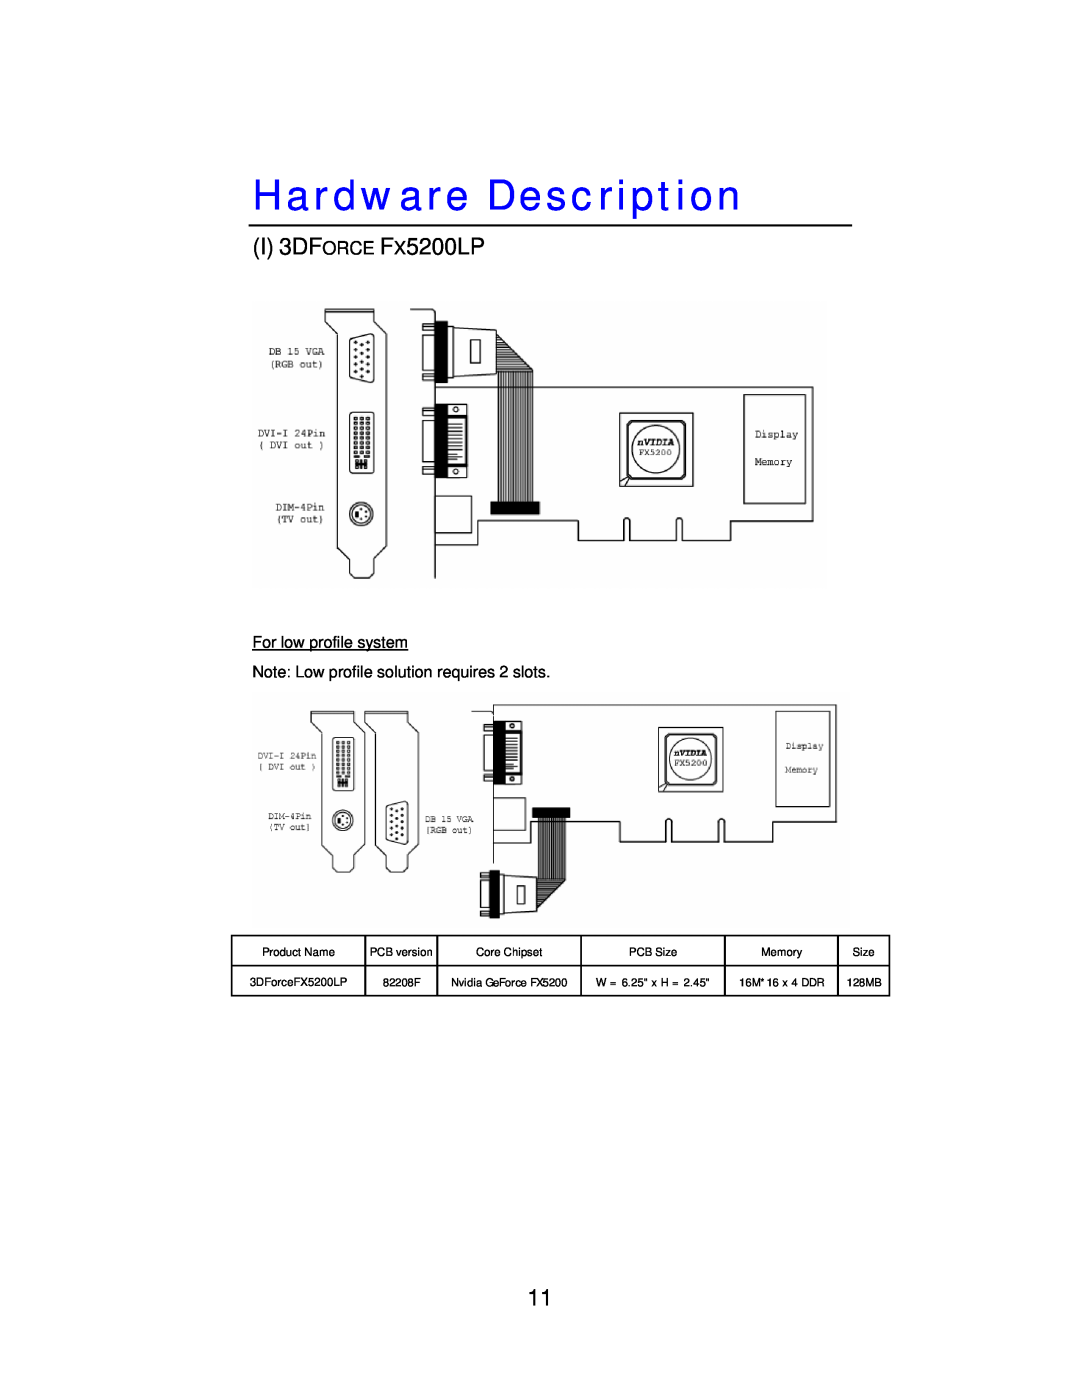 Jaton 5200 Hardware Description, For low profile system Note Low profile solution requires 2 slots, Product Name, PCB Size 